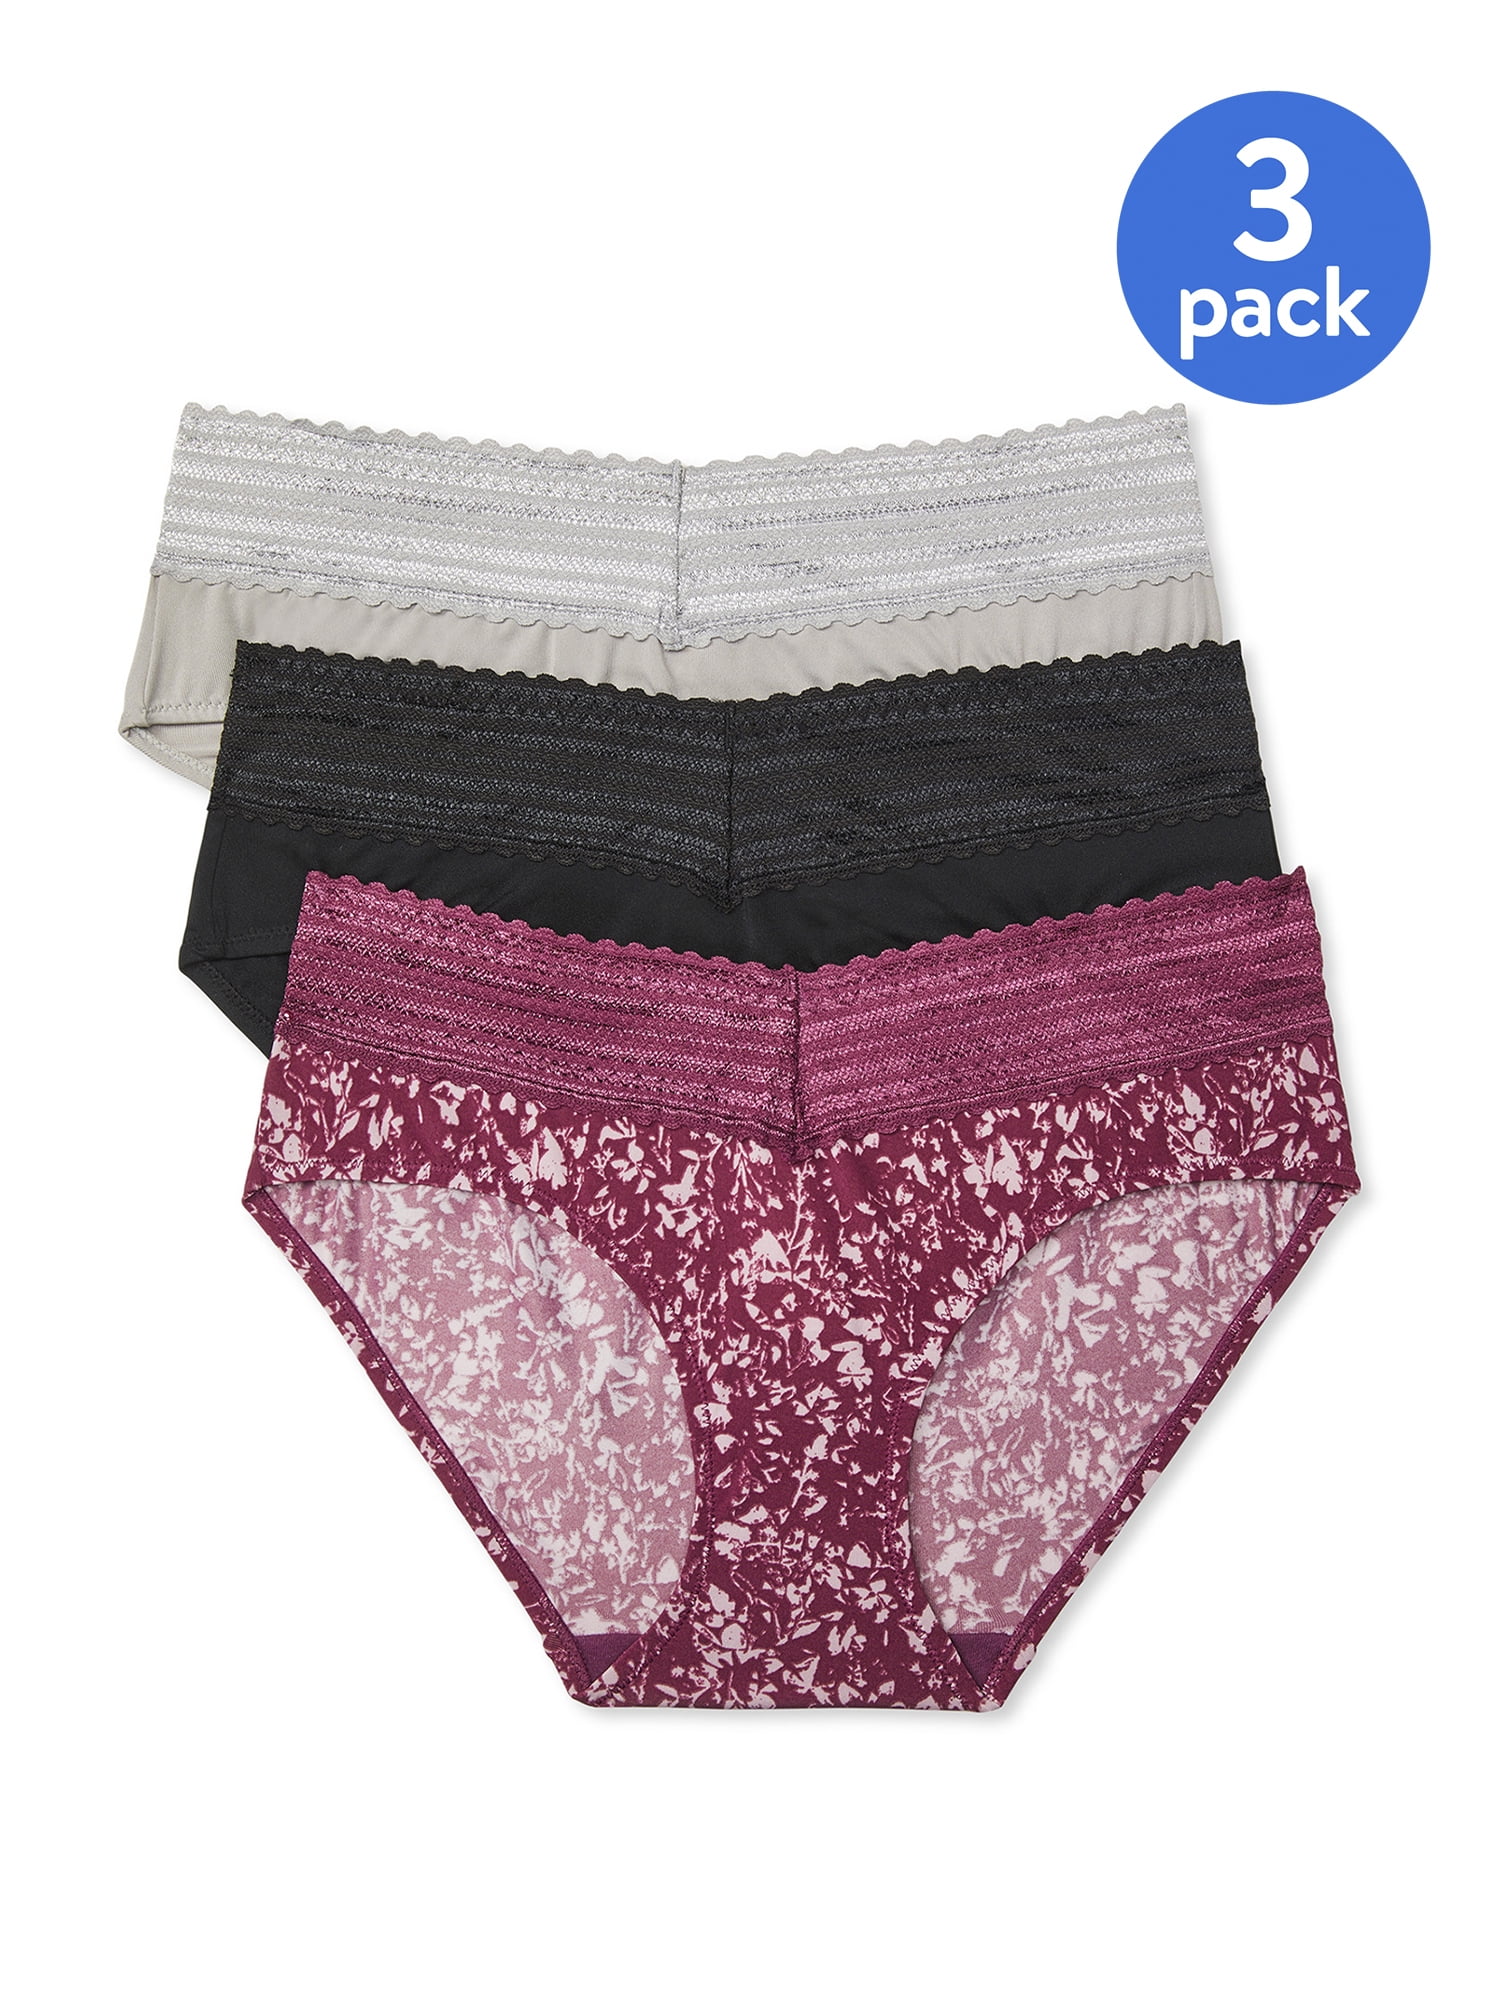 . Soft Teen Girls Underwear 7 Pack Bamboo Lace Cotton Briefs/Pants/Knickers One Size To Fit 11-16 Yrs